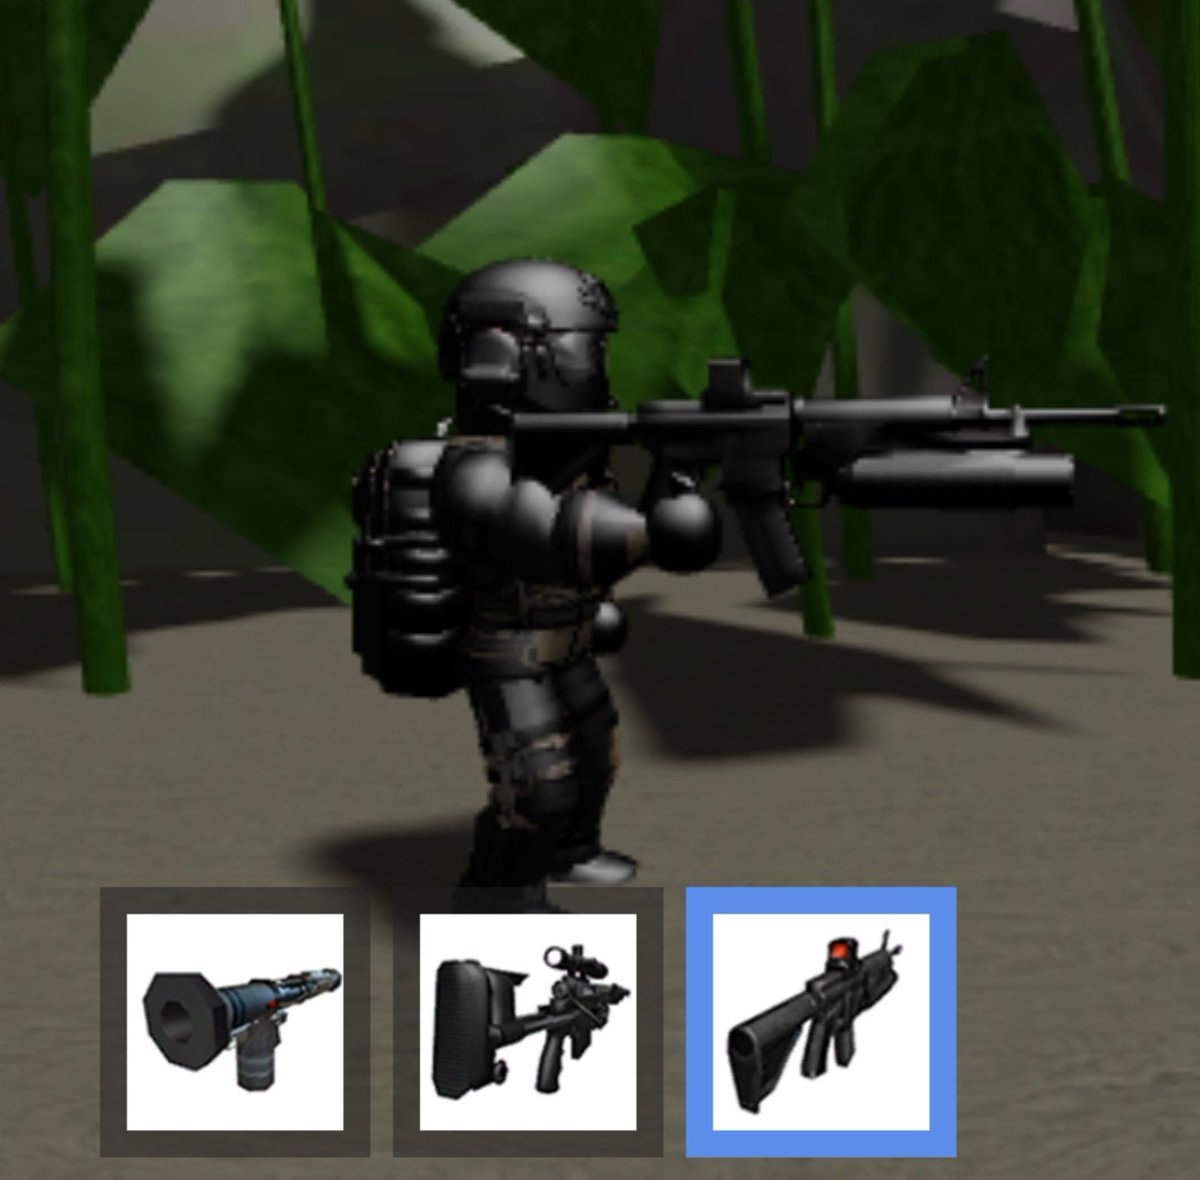 Leirob111 On Twitter I Finally Was Able To Make My Character Yesterday This Is How It Turned Out The Fast Helmet Black Tactical Headphones Tactical Backpack And Balaclava Are Created By Trustytrus - black tactical headphones roblox